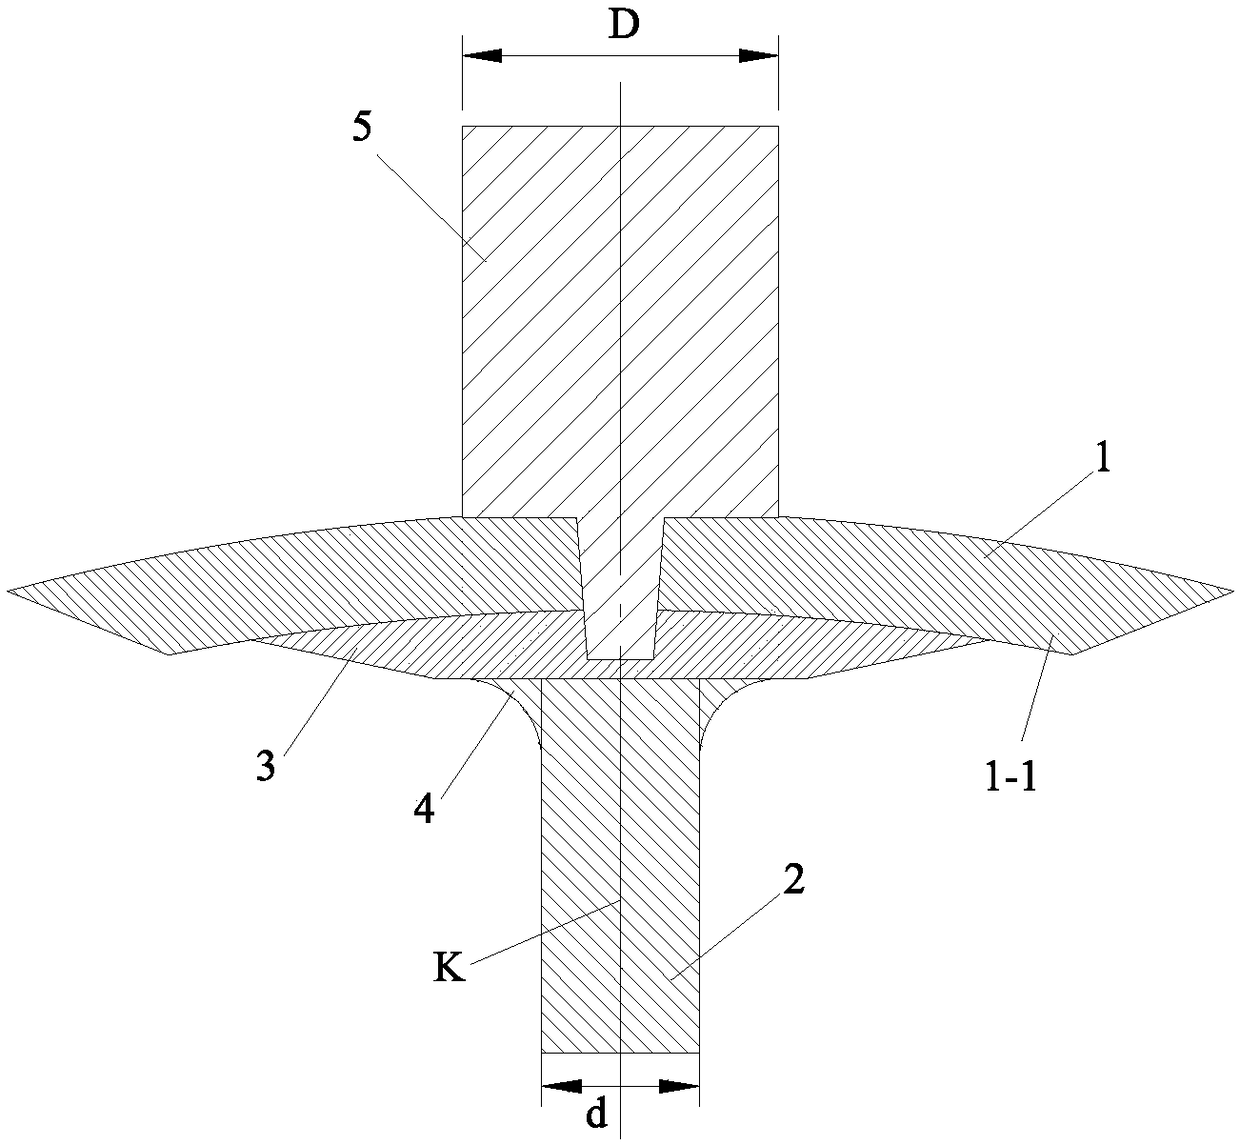 T-shaped self-support structure suitable for curved surface friction stir welding